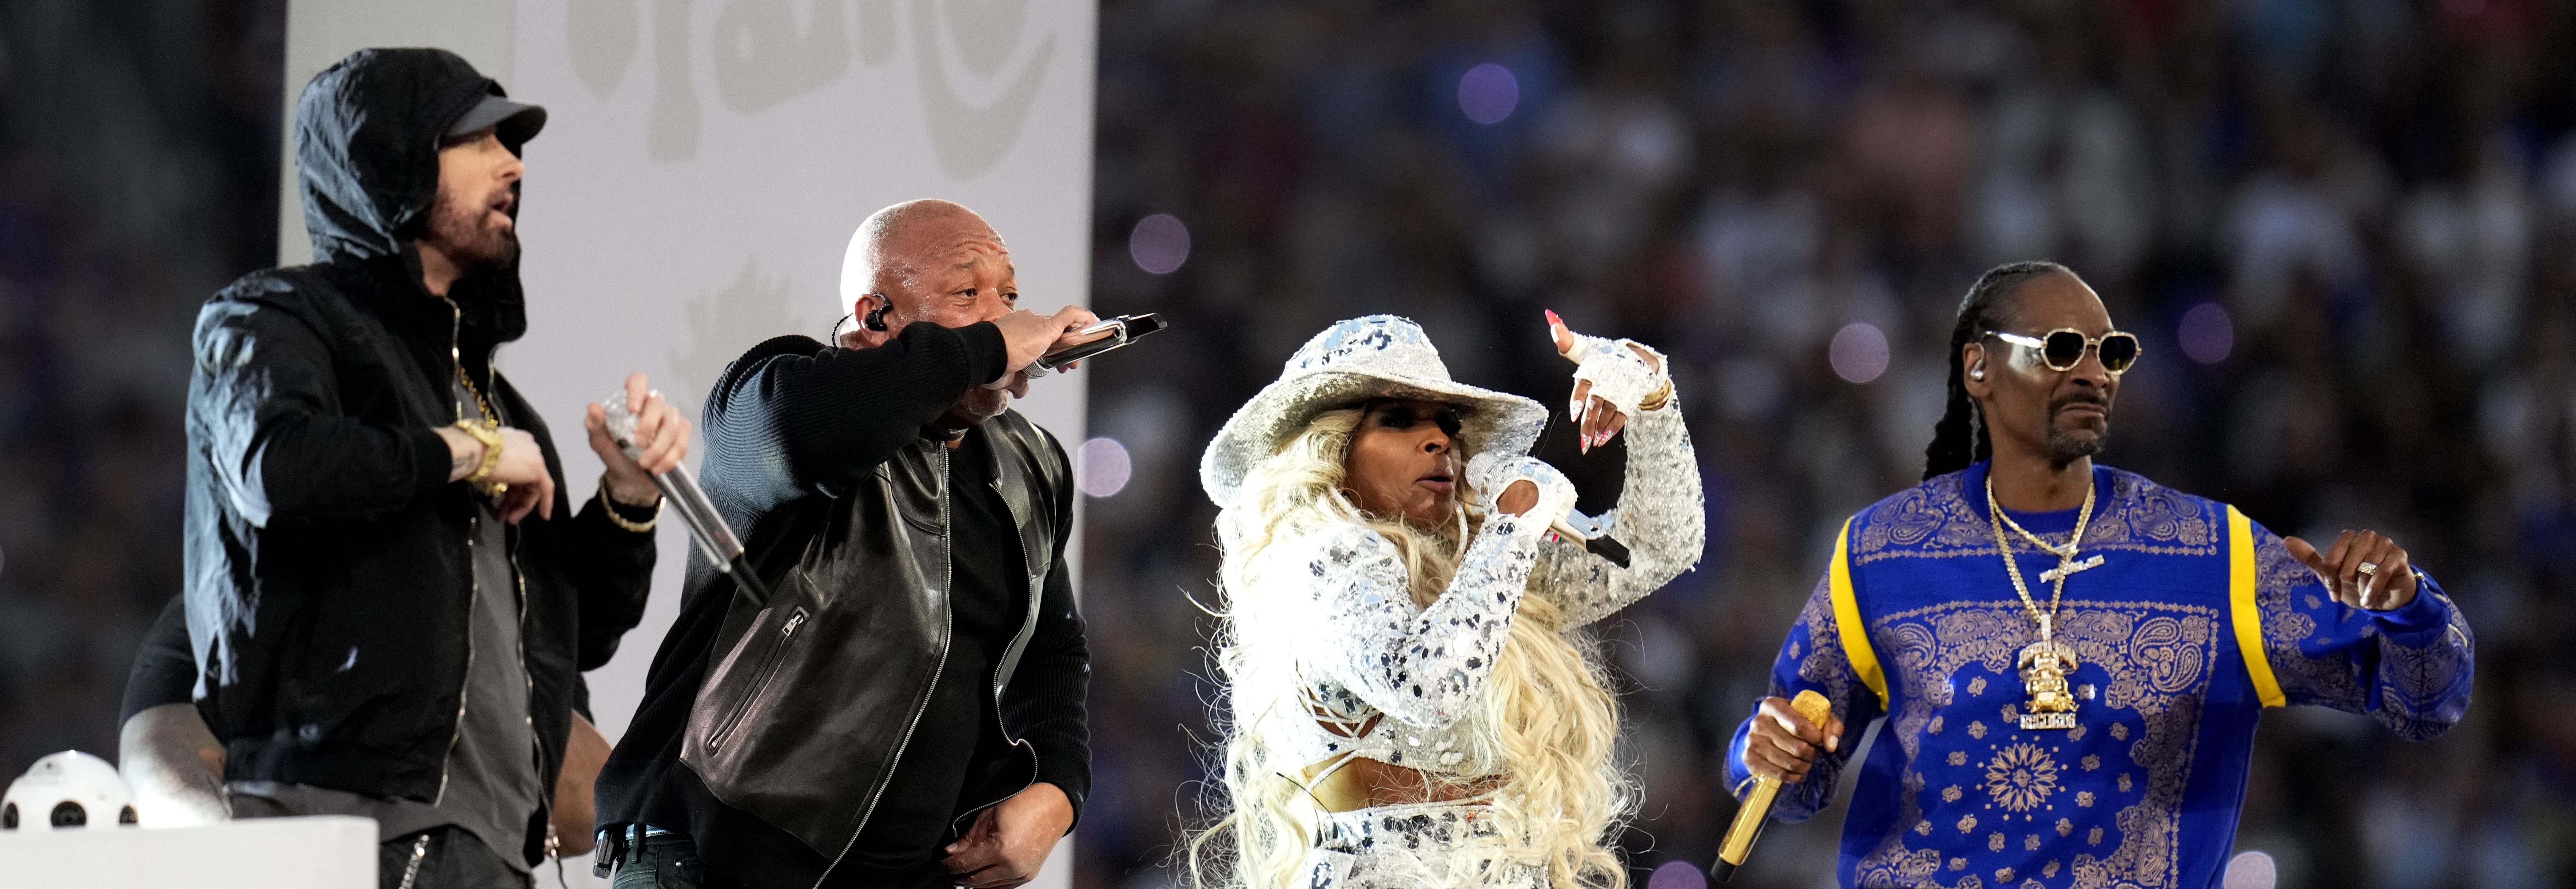 Mary J. Blige wows Super Bowl halftime show in crystal-embellished